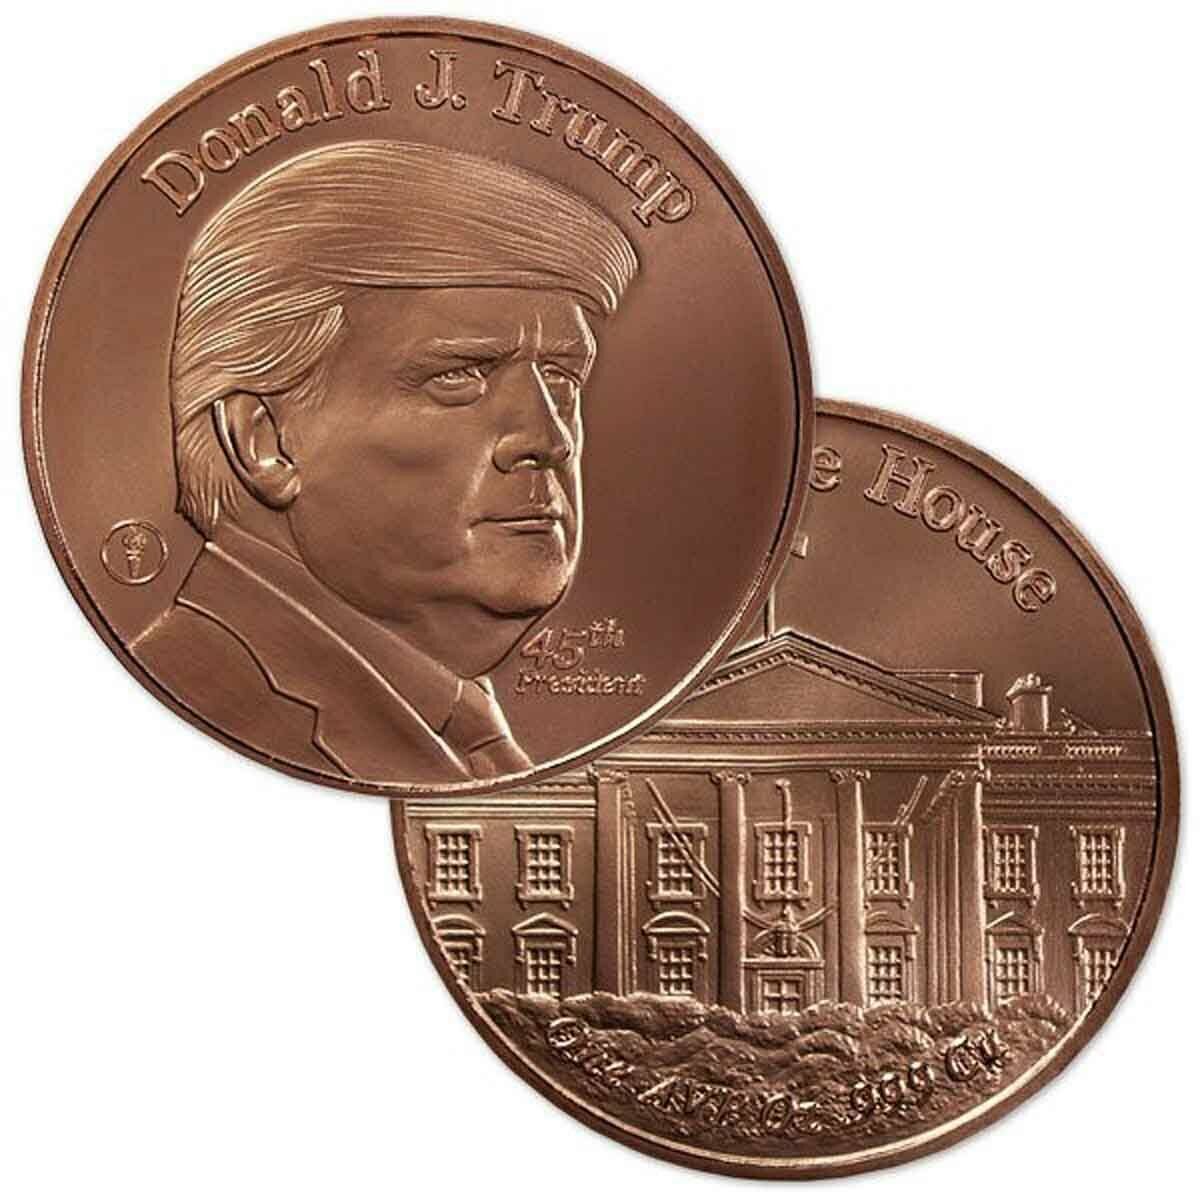 PRESIDENT TRUMP 100 COPPER ROUND COIN High Quality